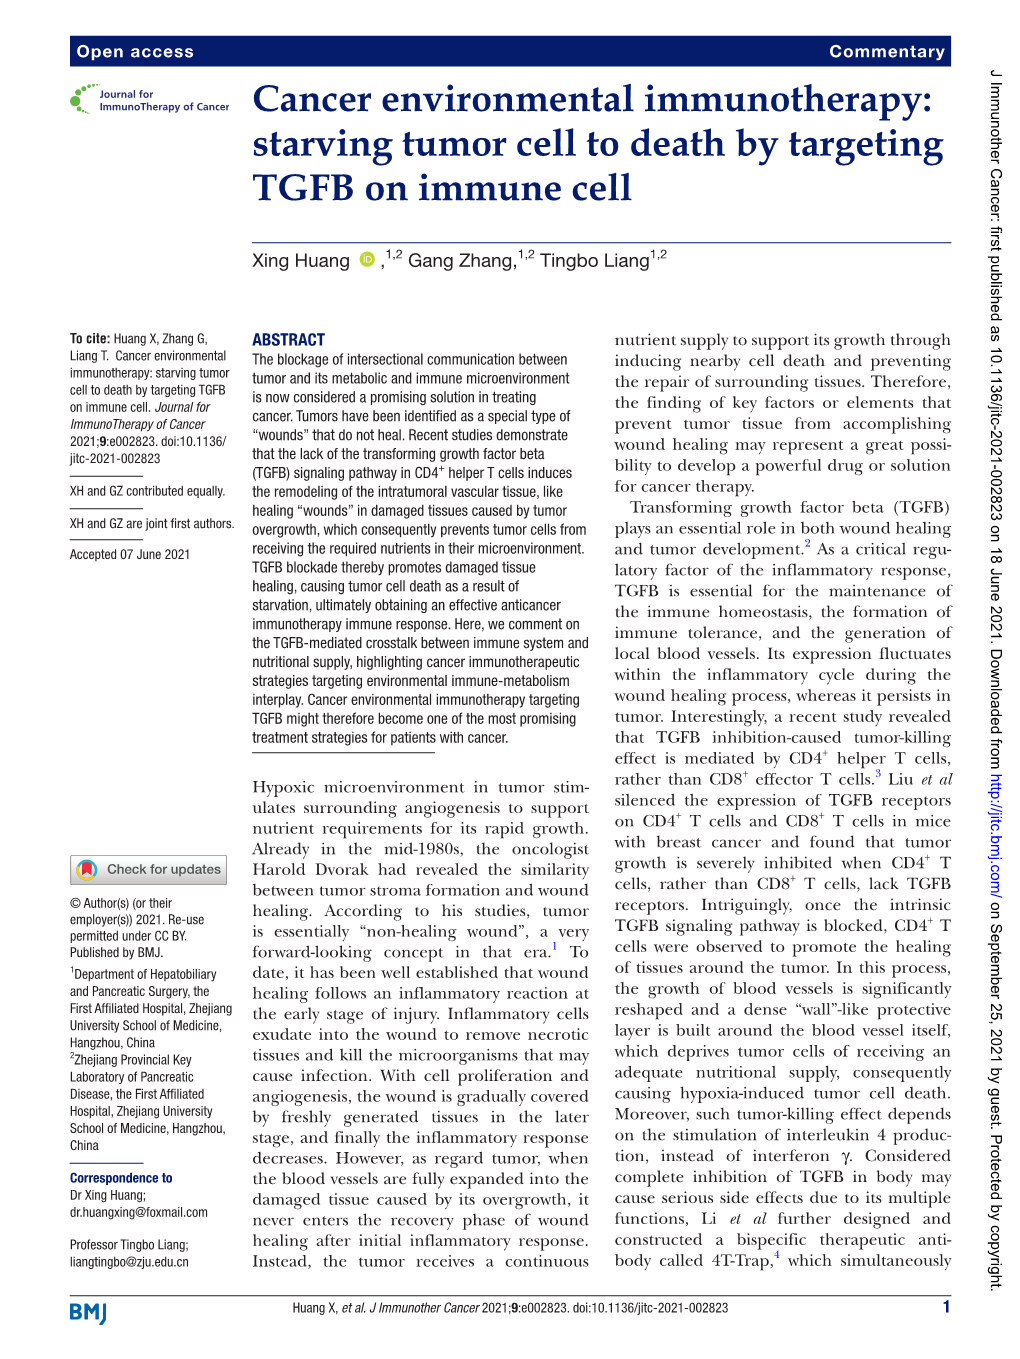 Starving Tumor Cell to Death by Targeting TGFB on Immune Cell